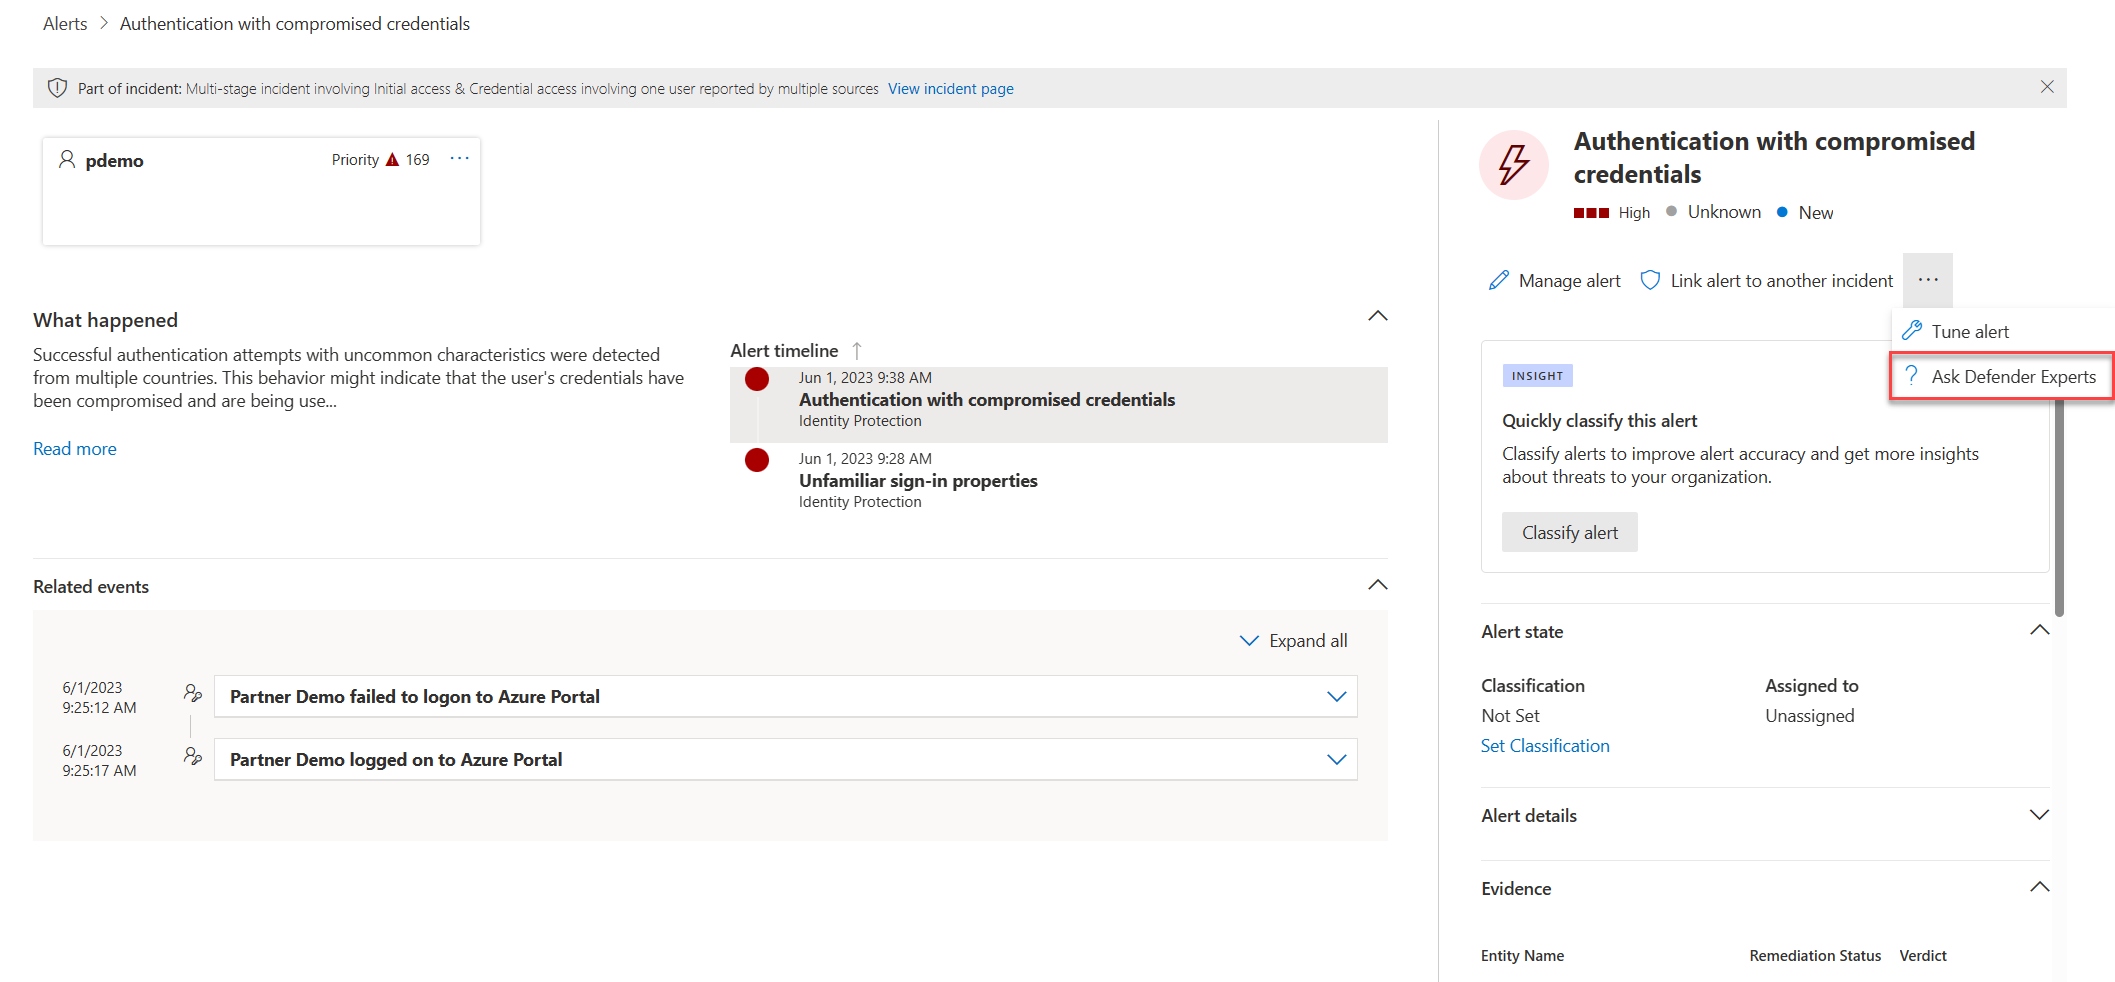 Screenshot of the Ask Defender Experts menu option in the Alerts page flyout menu in the Microsoft 365 Defender portal.